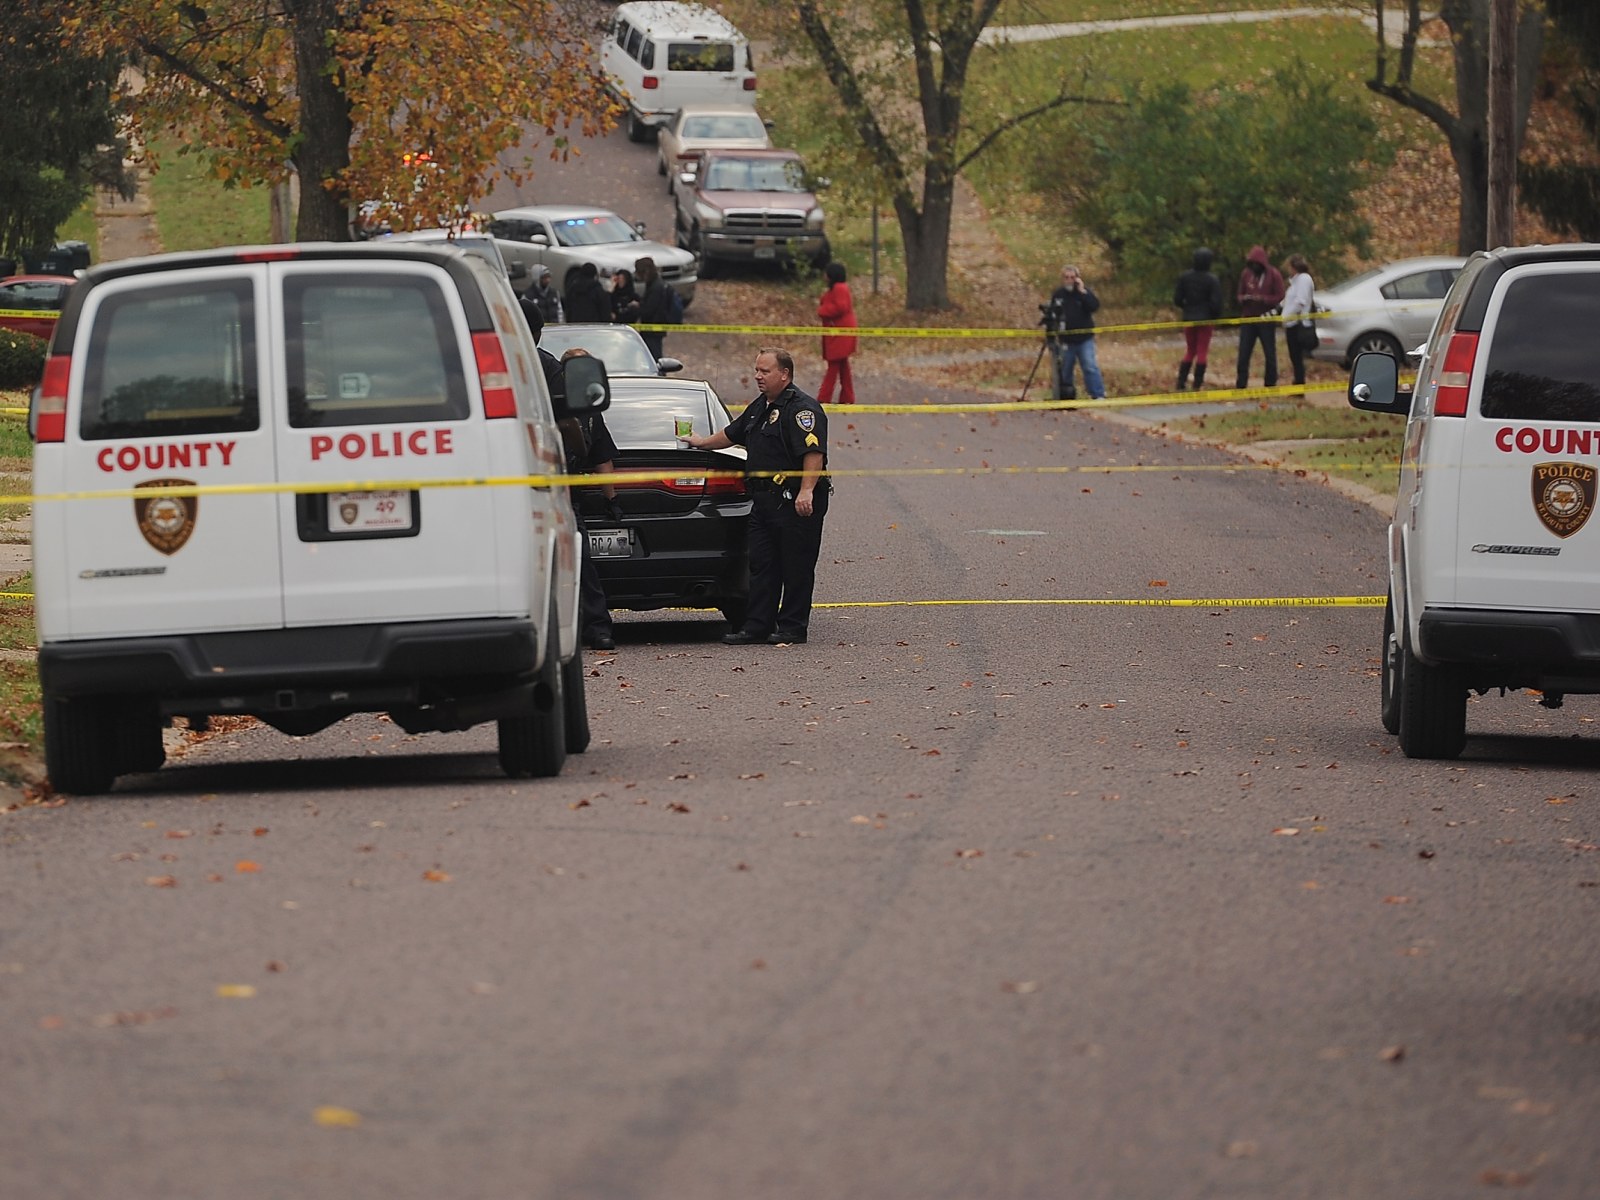 Missouri Father Shoots His Two Adult Children Dead Before Attempting to Kill Himself